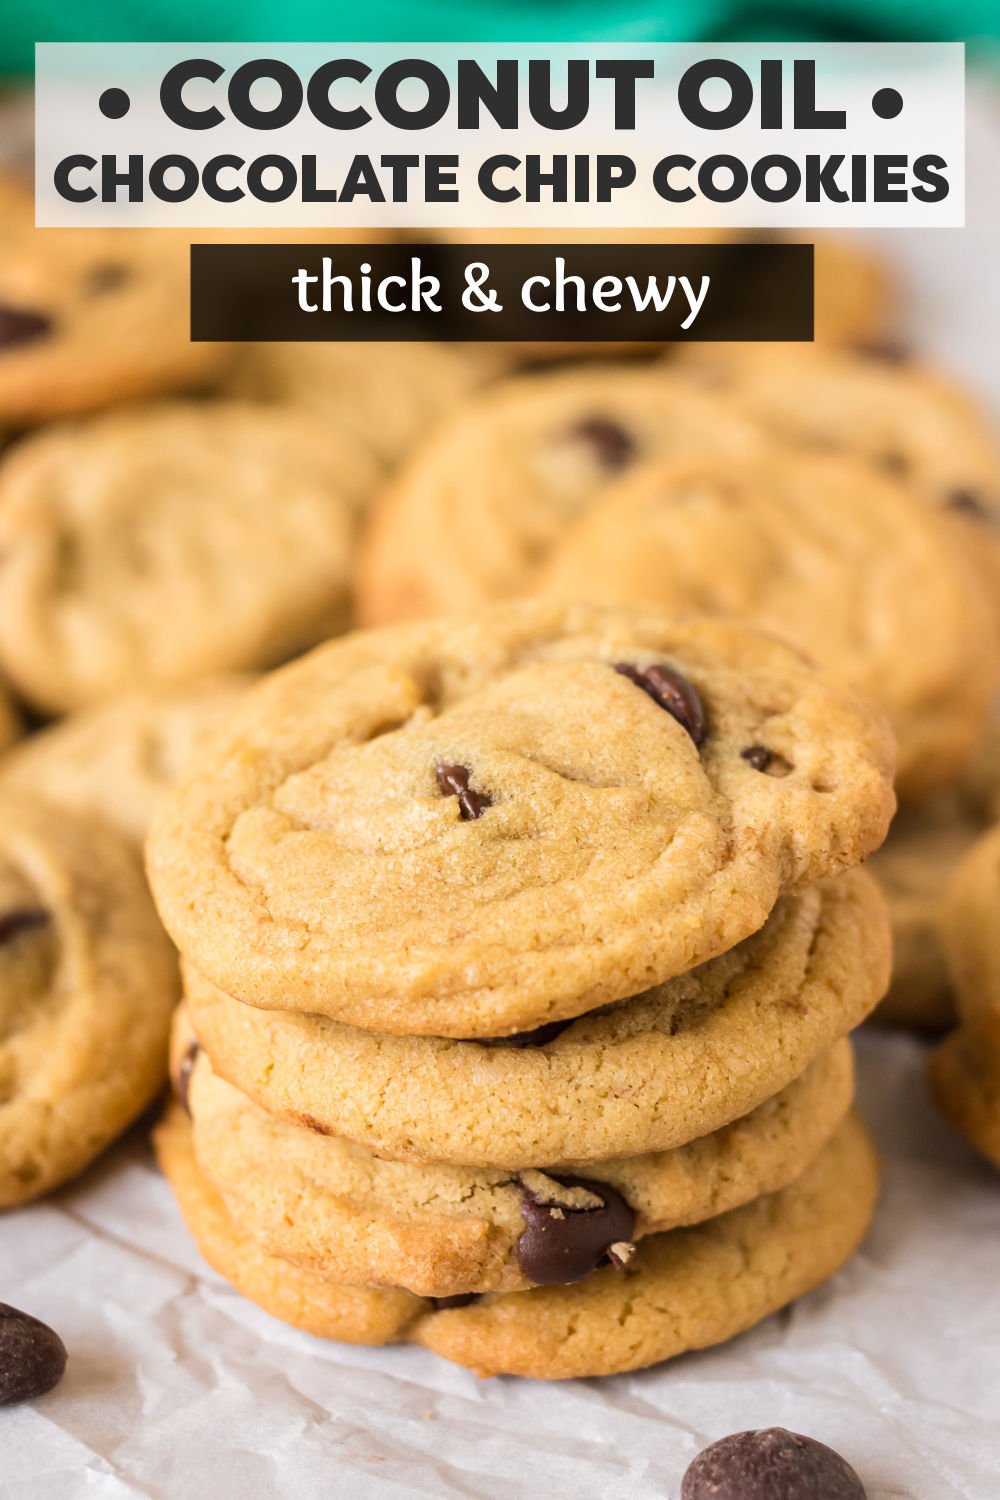 Coconut Oil Chocolate Chip Cookies are soft and chewy with rich chocolate chips and crisp edges. Made with coconut oil instead of butter, these chewy chocolate chip cookies have a mild coconut flavor and are super easy to make. | www.persnicketyplates.com